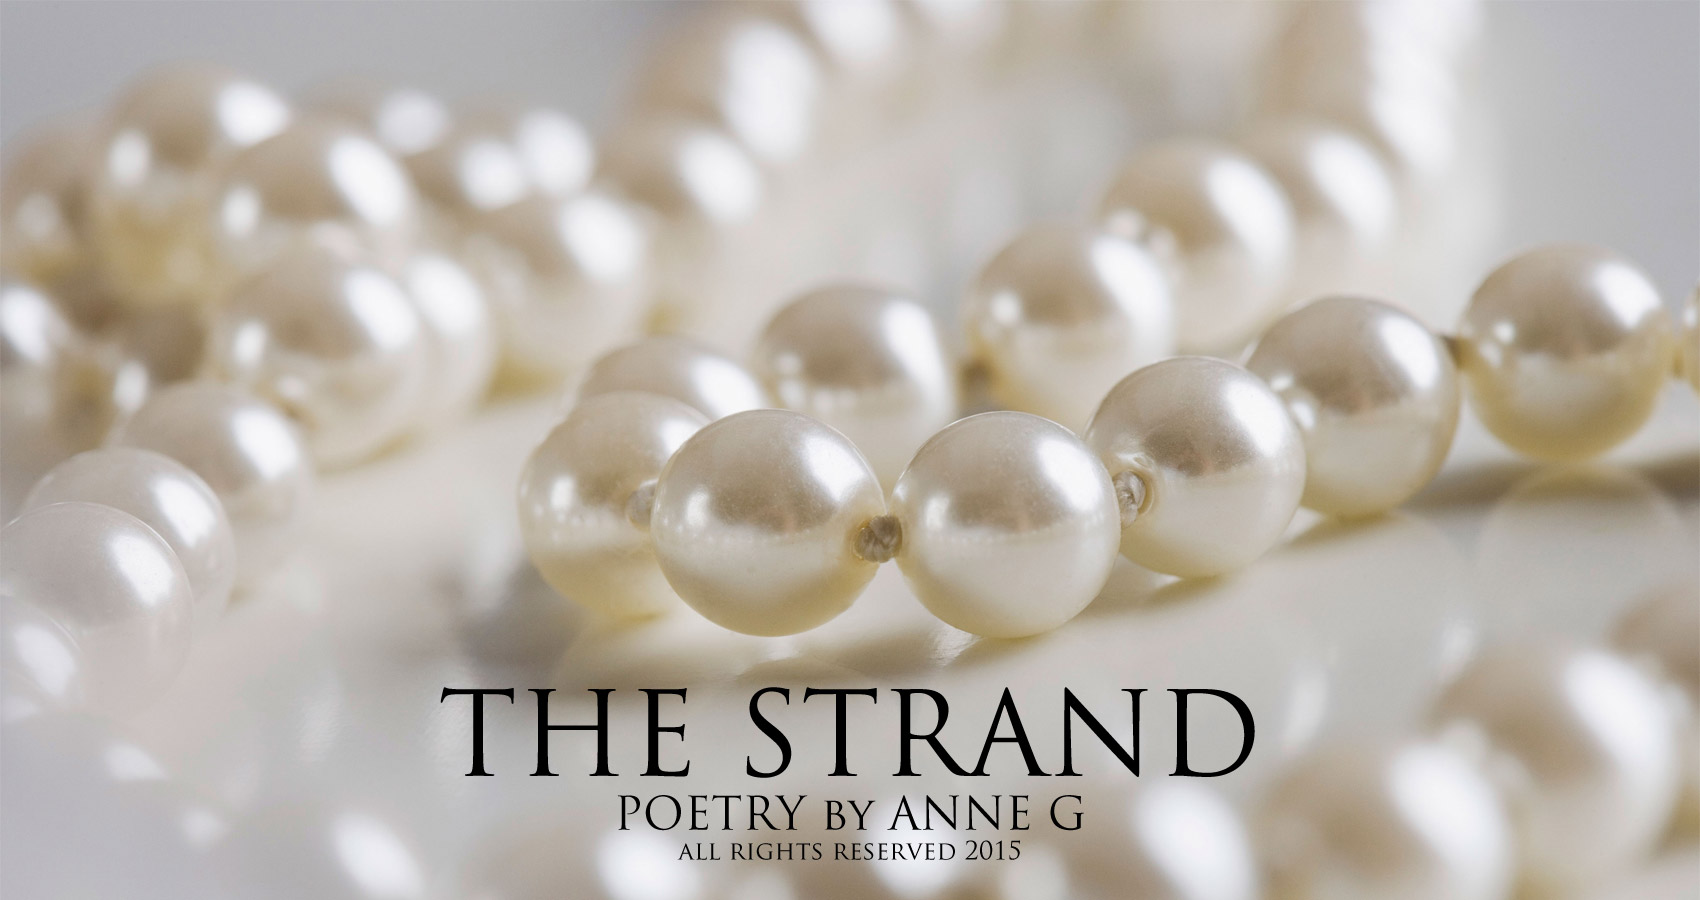 The Strand at spillwords.com by Anne G